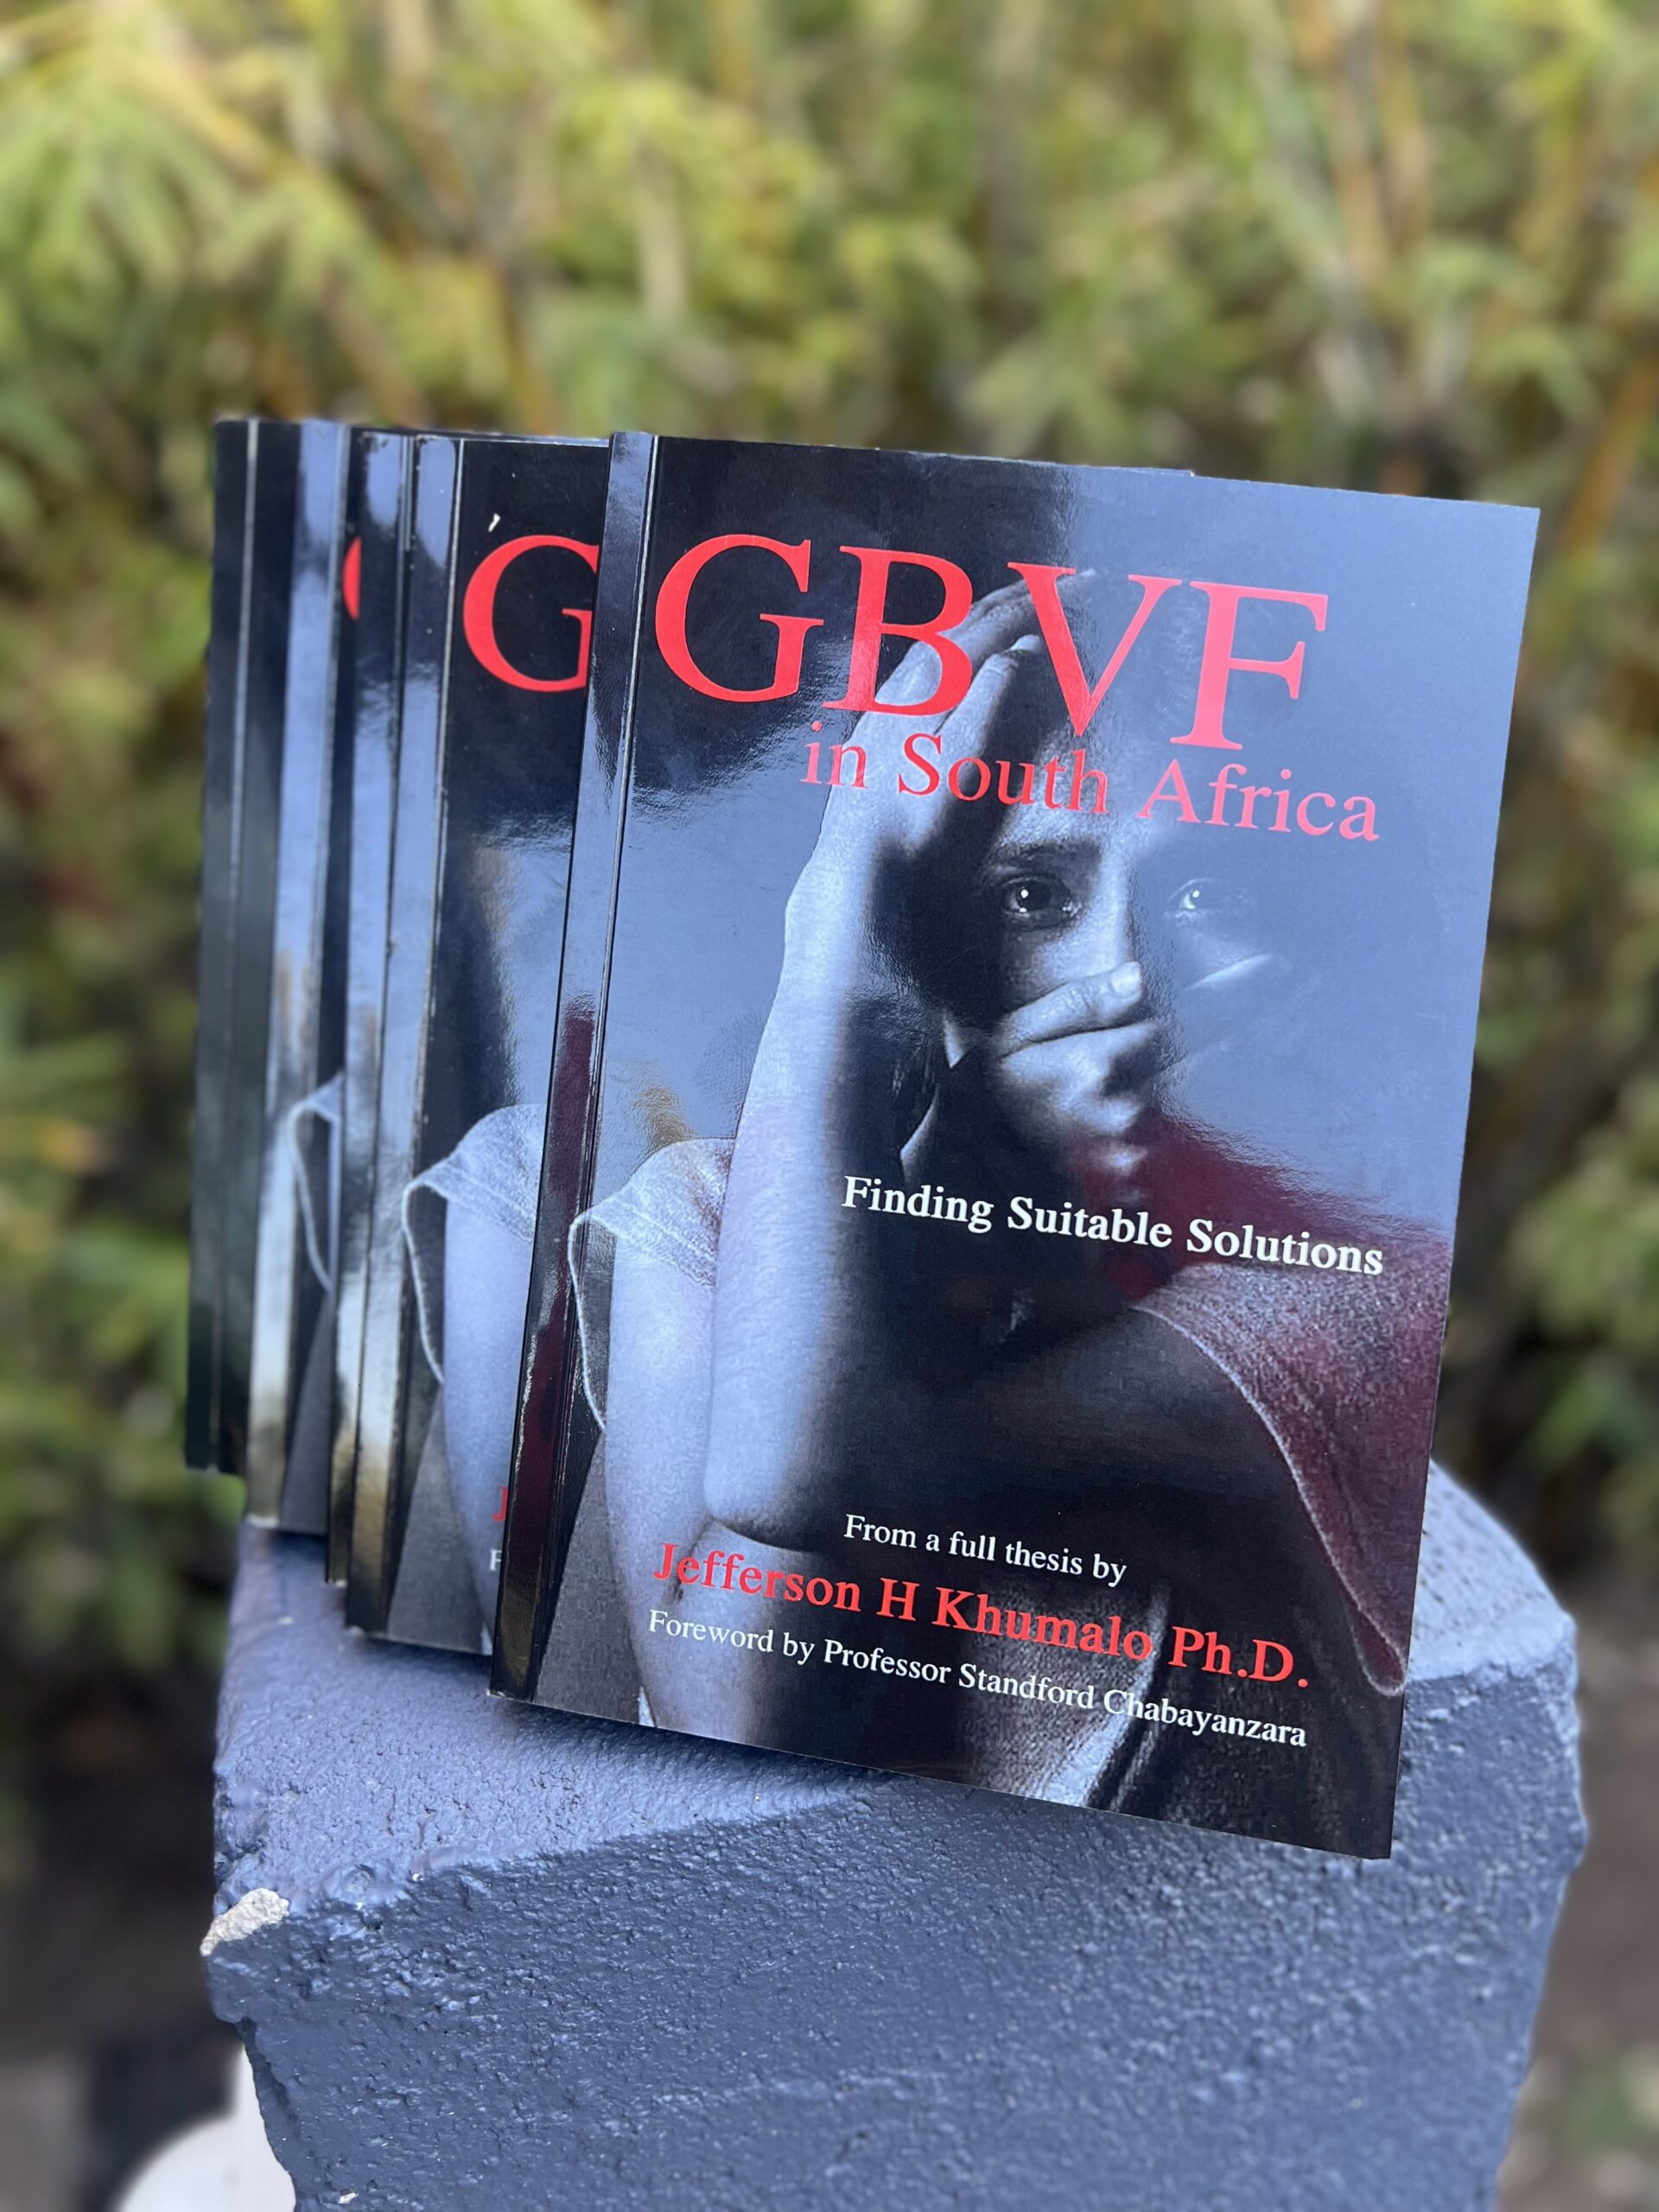 Dr. Jefferson Khumalo Launches Book to Combat Gender-Based Violence in South Africa